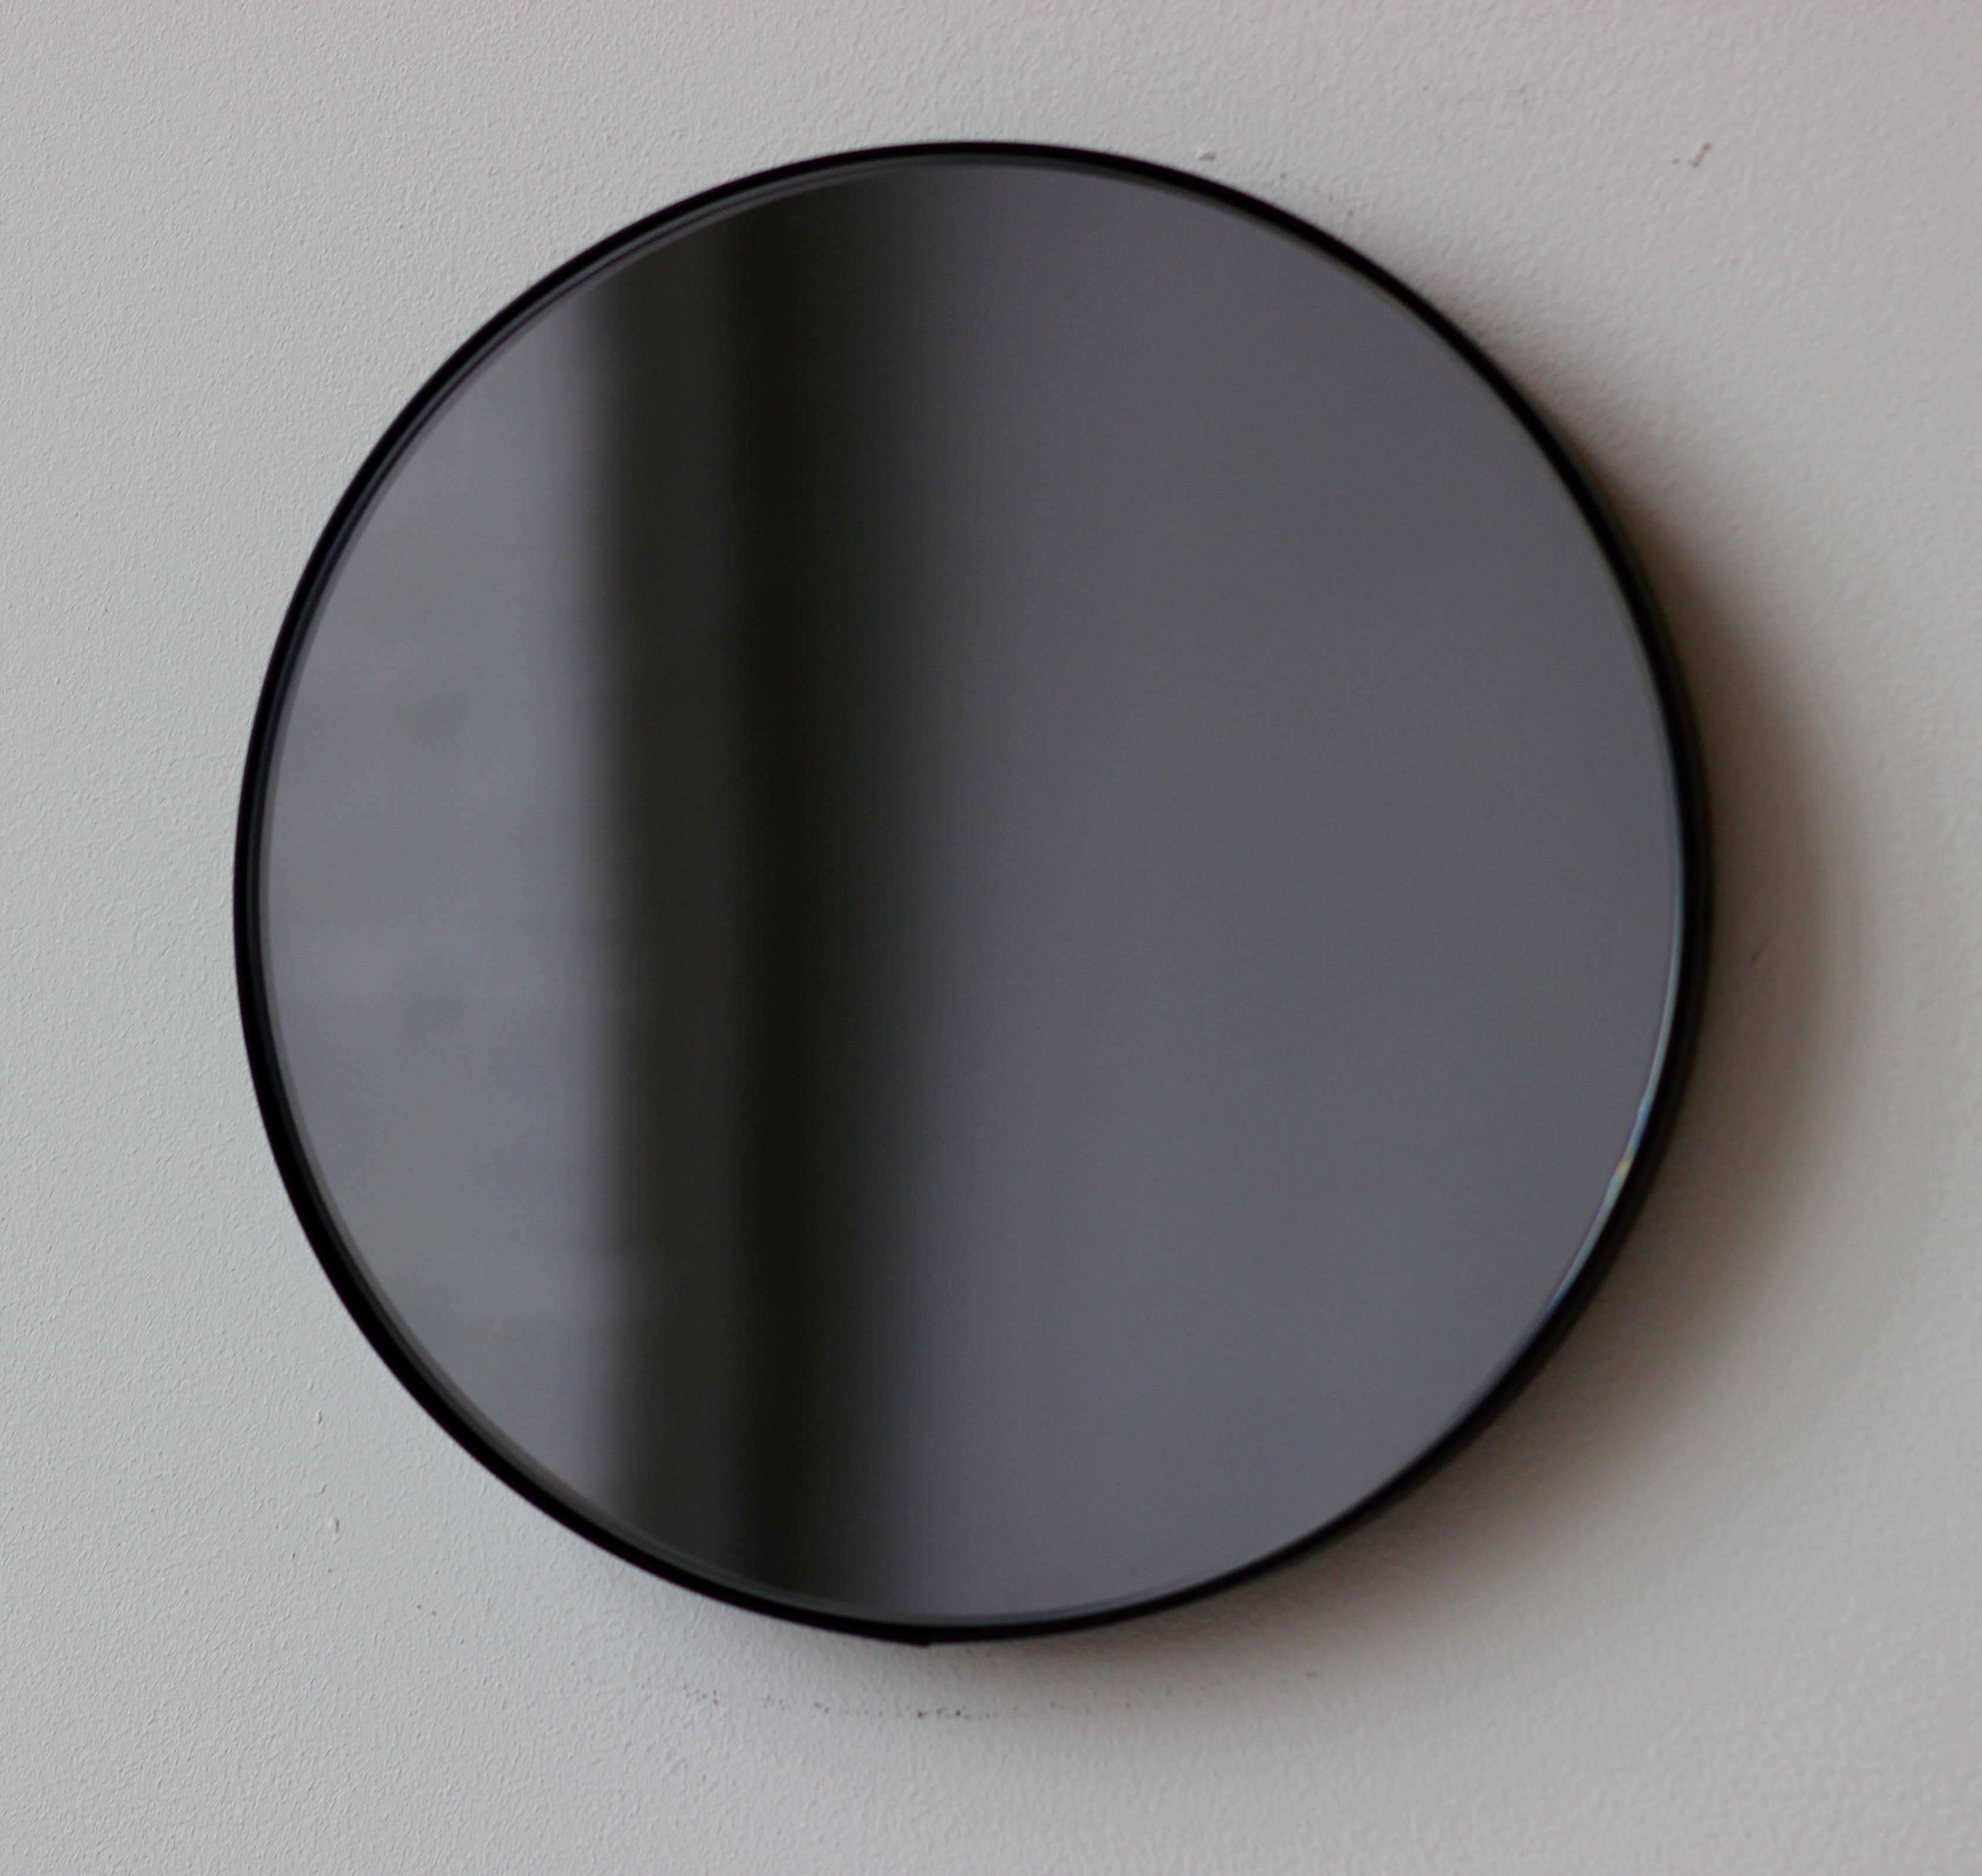 Contemporary Orbis™ round black tinted mirror with a minimalist aluminium powder coated black frame. Designed and handcrafted in London, UK.

Medium, large and extra-large mirrors (60, 80 and 100cm) are fitted with an ingenious French cleat (split